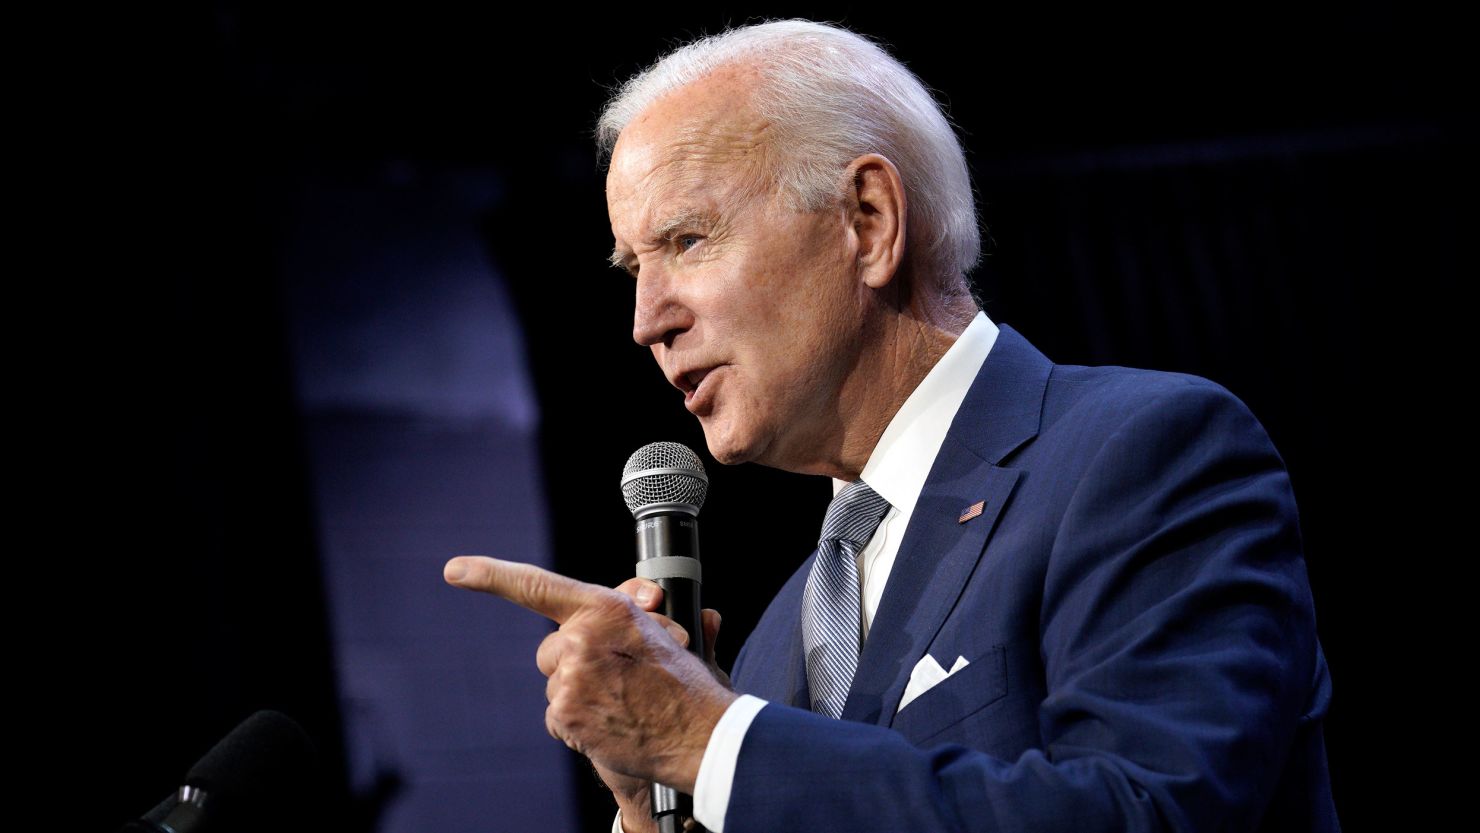 US President Joe Biden speaks at a Democratic National Committee event in Washington, DC, US, on Tuesday, Oct. 18, 2022. Biden pledged to codify abortion protection into federal law with his first bill in a new Congress, as he looks to rally voters for Democrats in the November midterm elections.